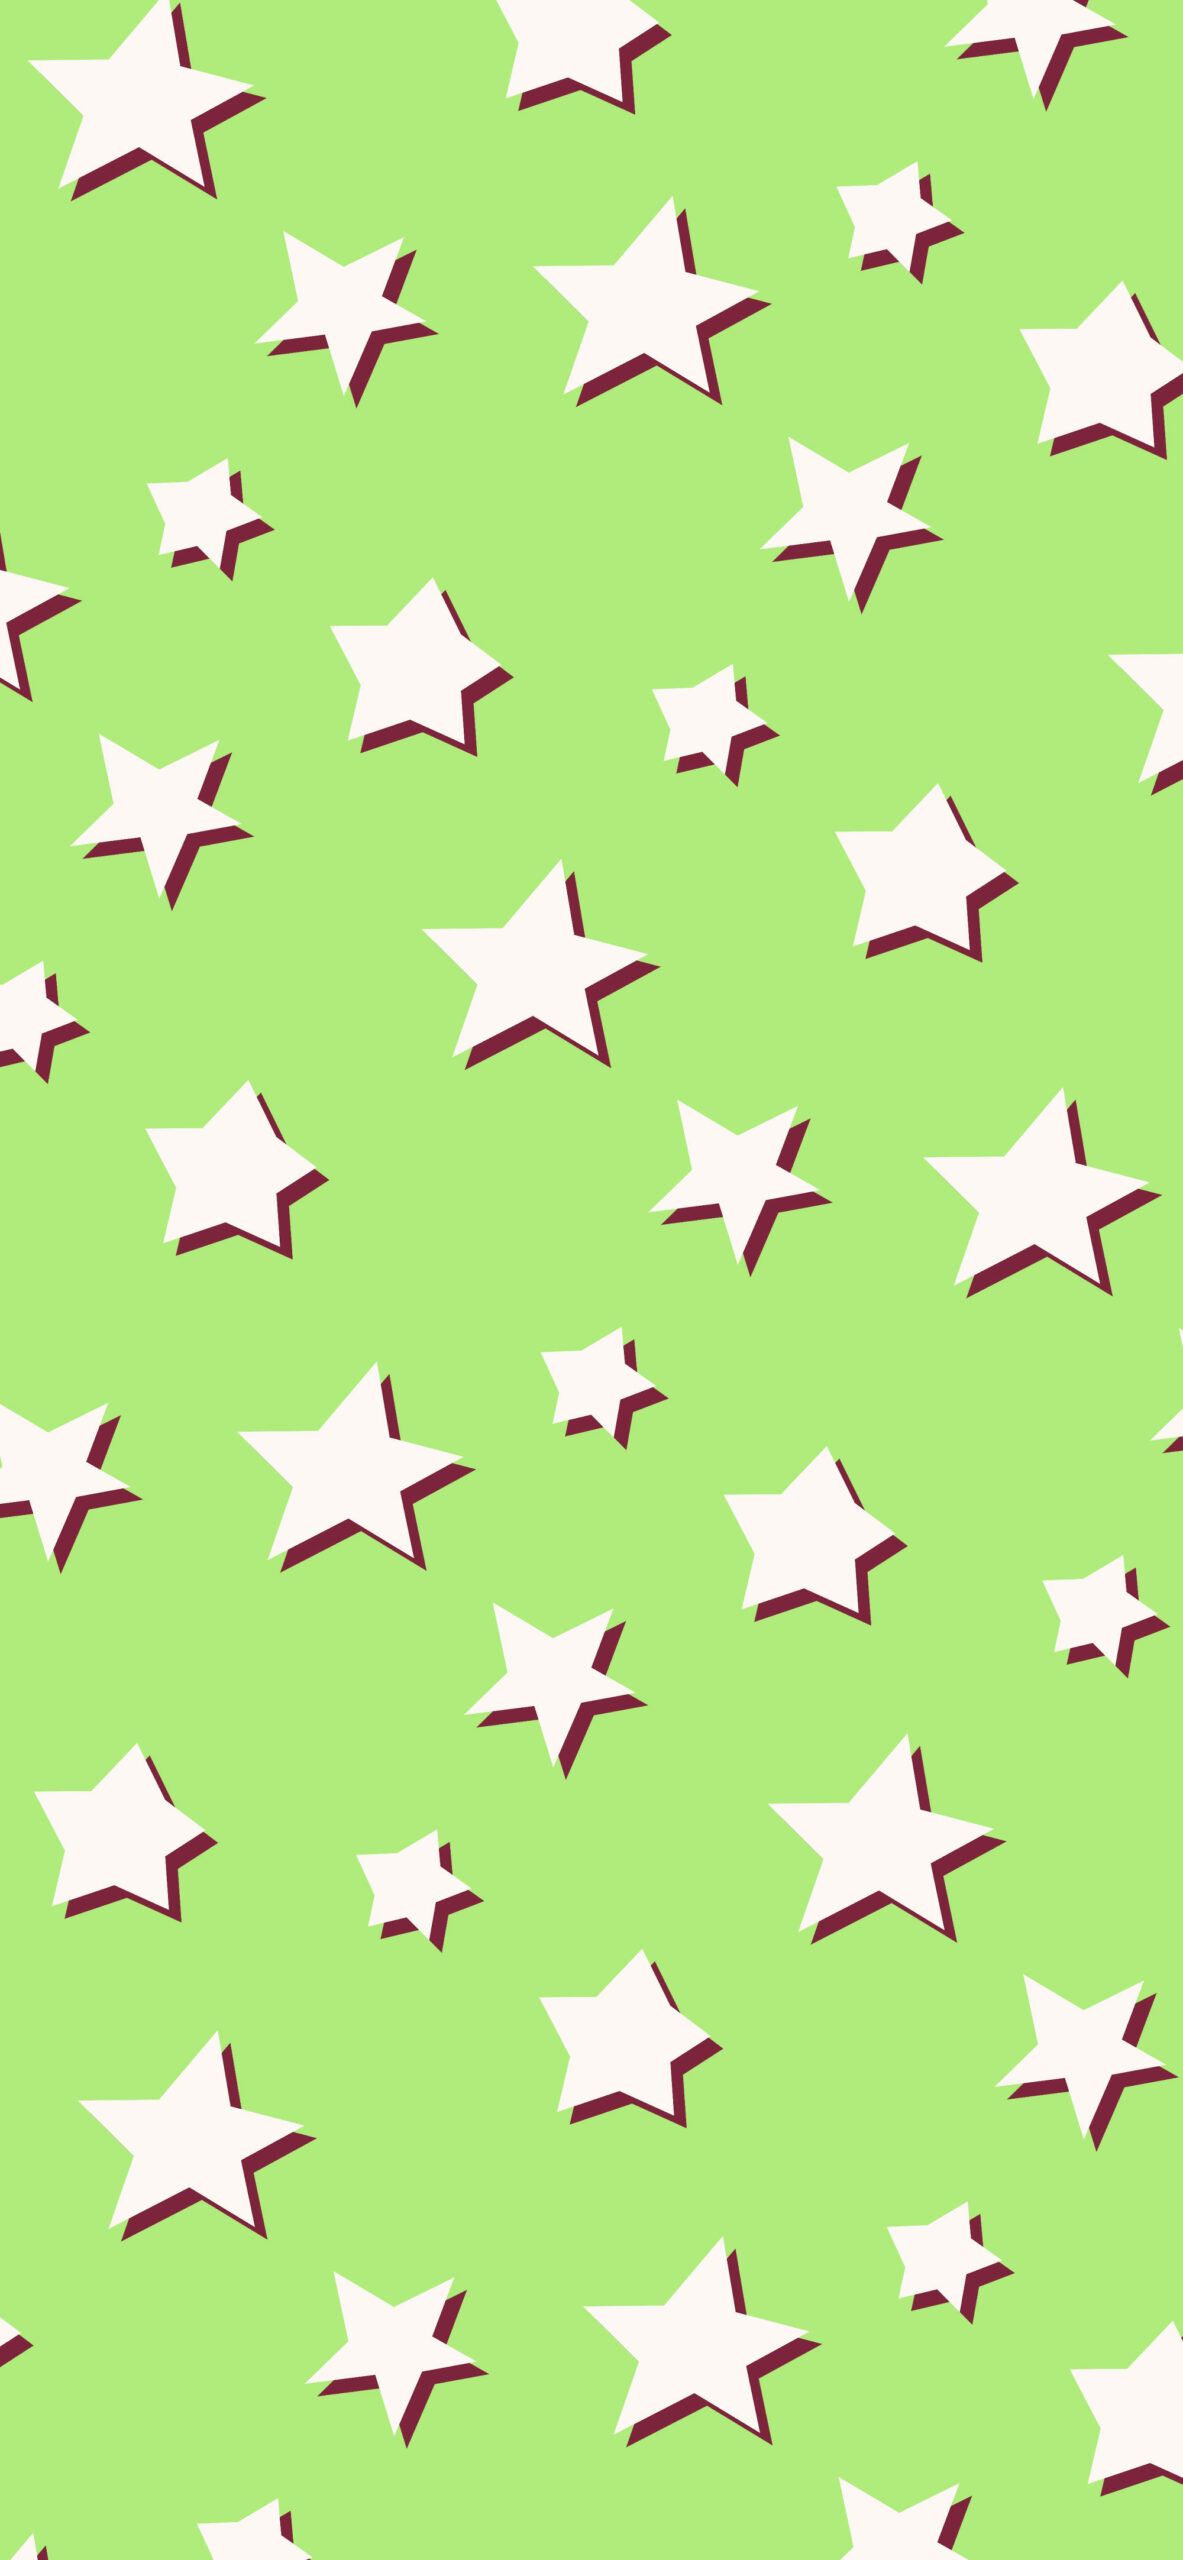 A green wallpaper with white stars - Stars, pattern